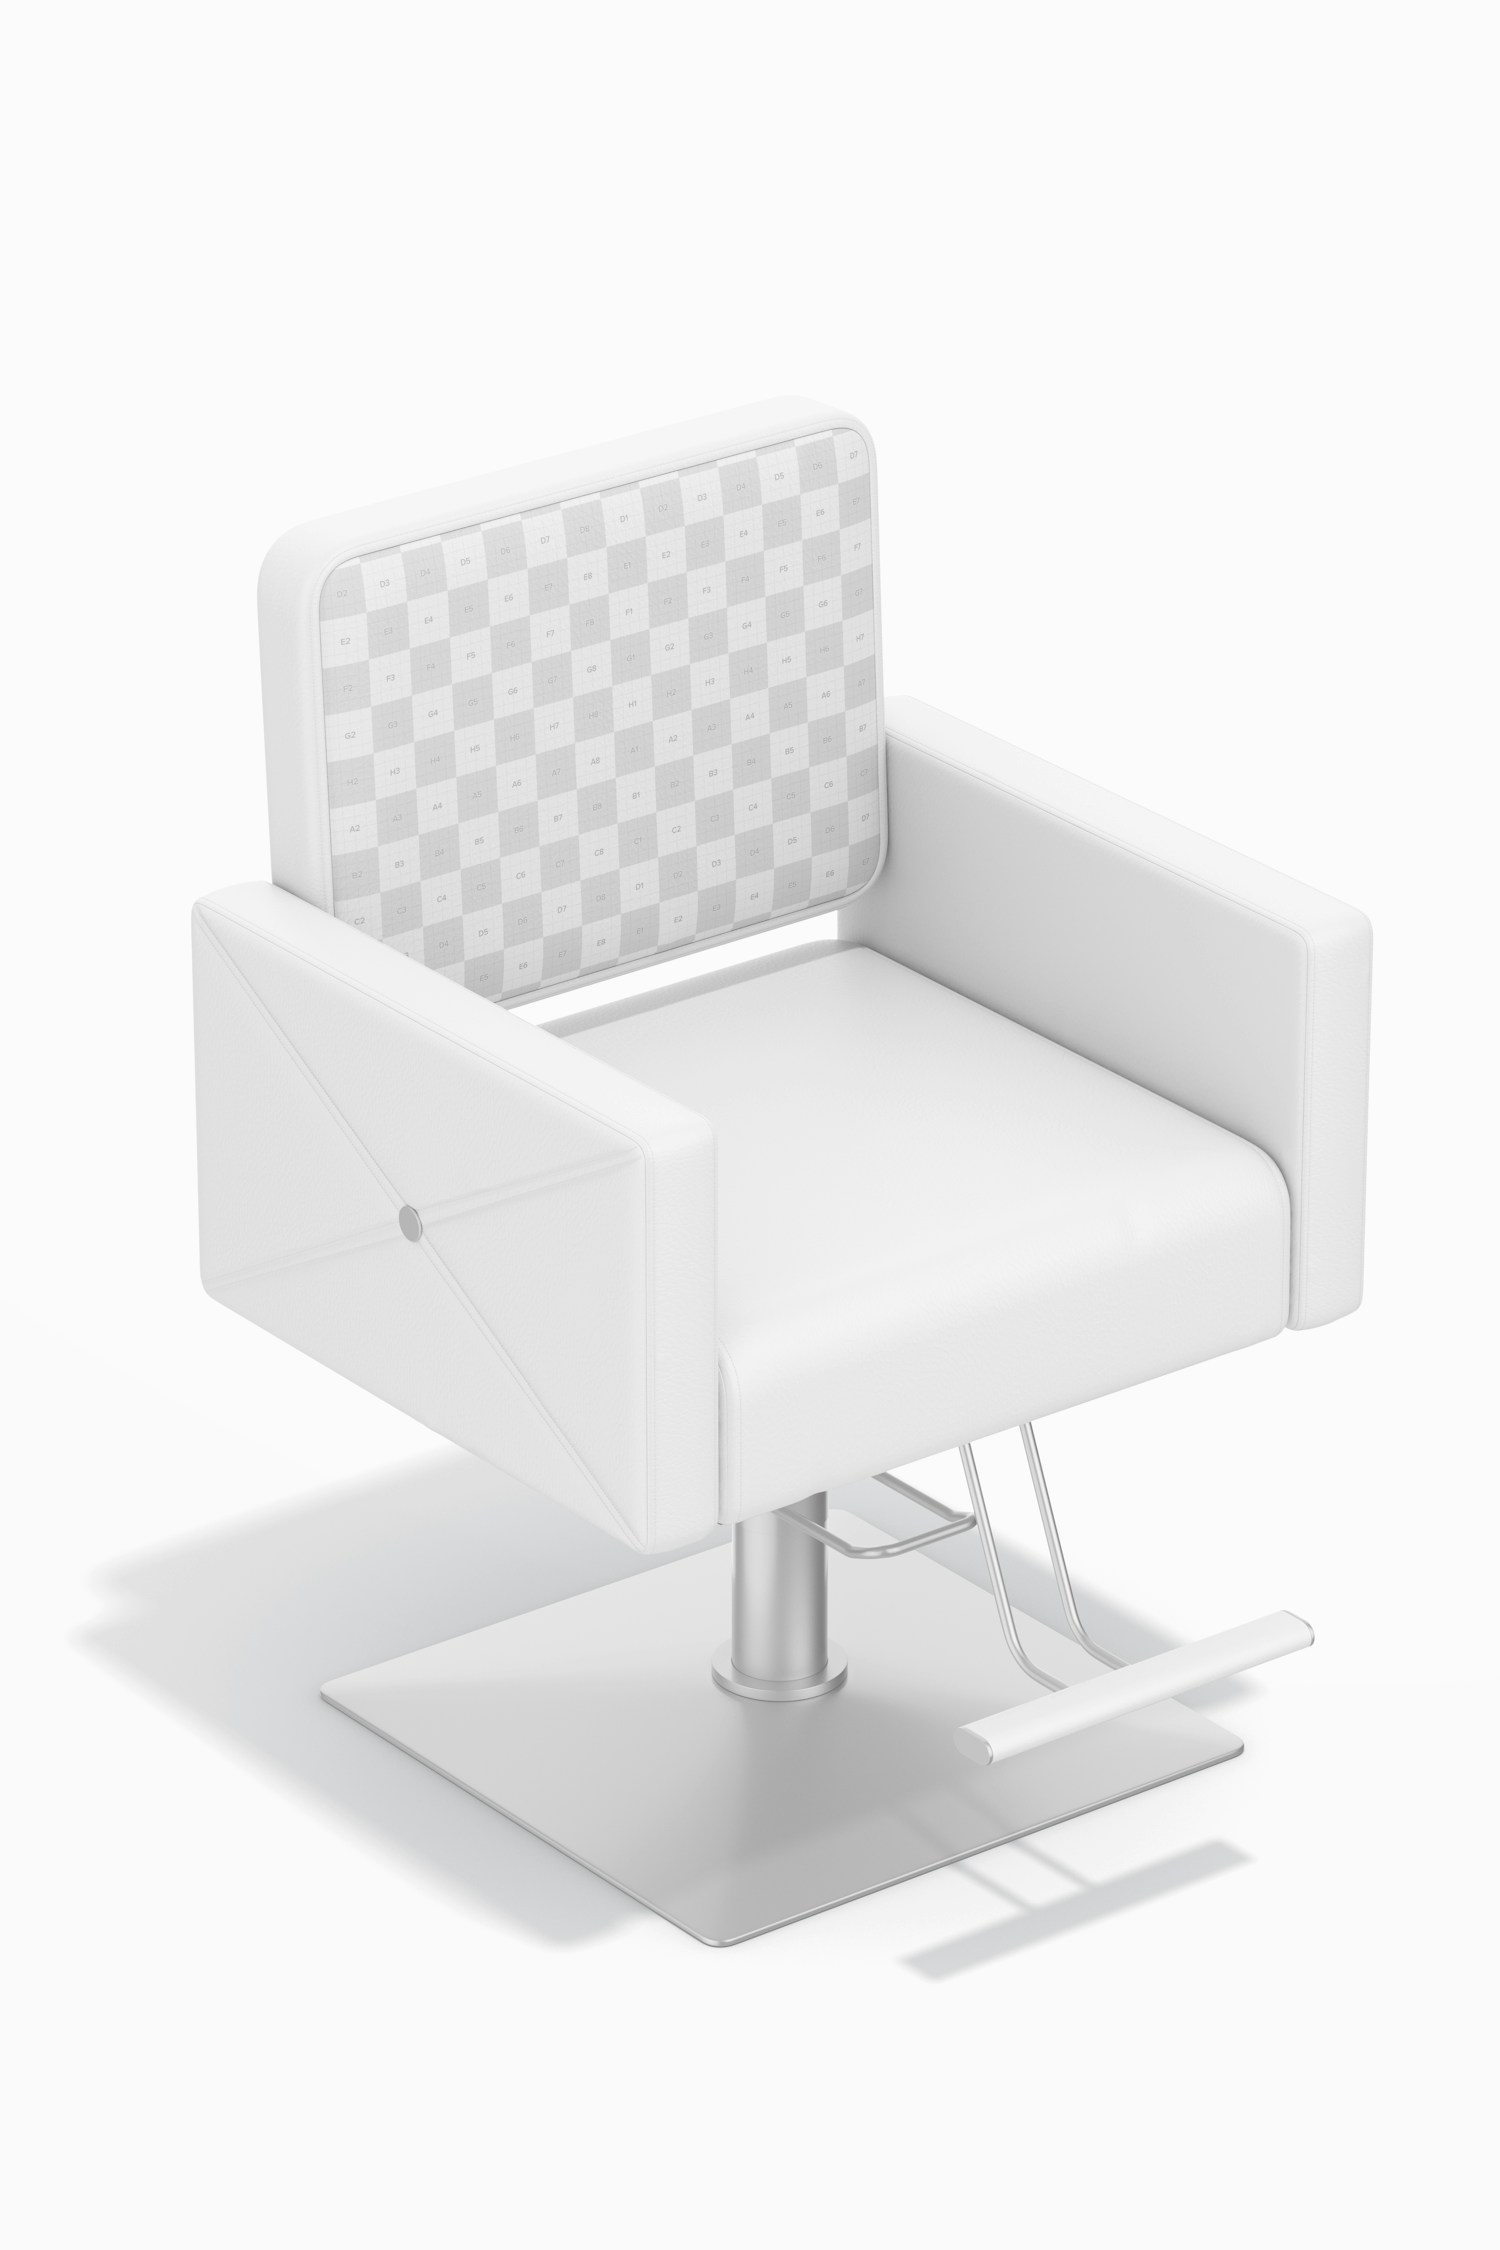 Barber Chair Mockup, Perspective